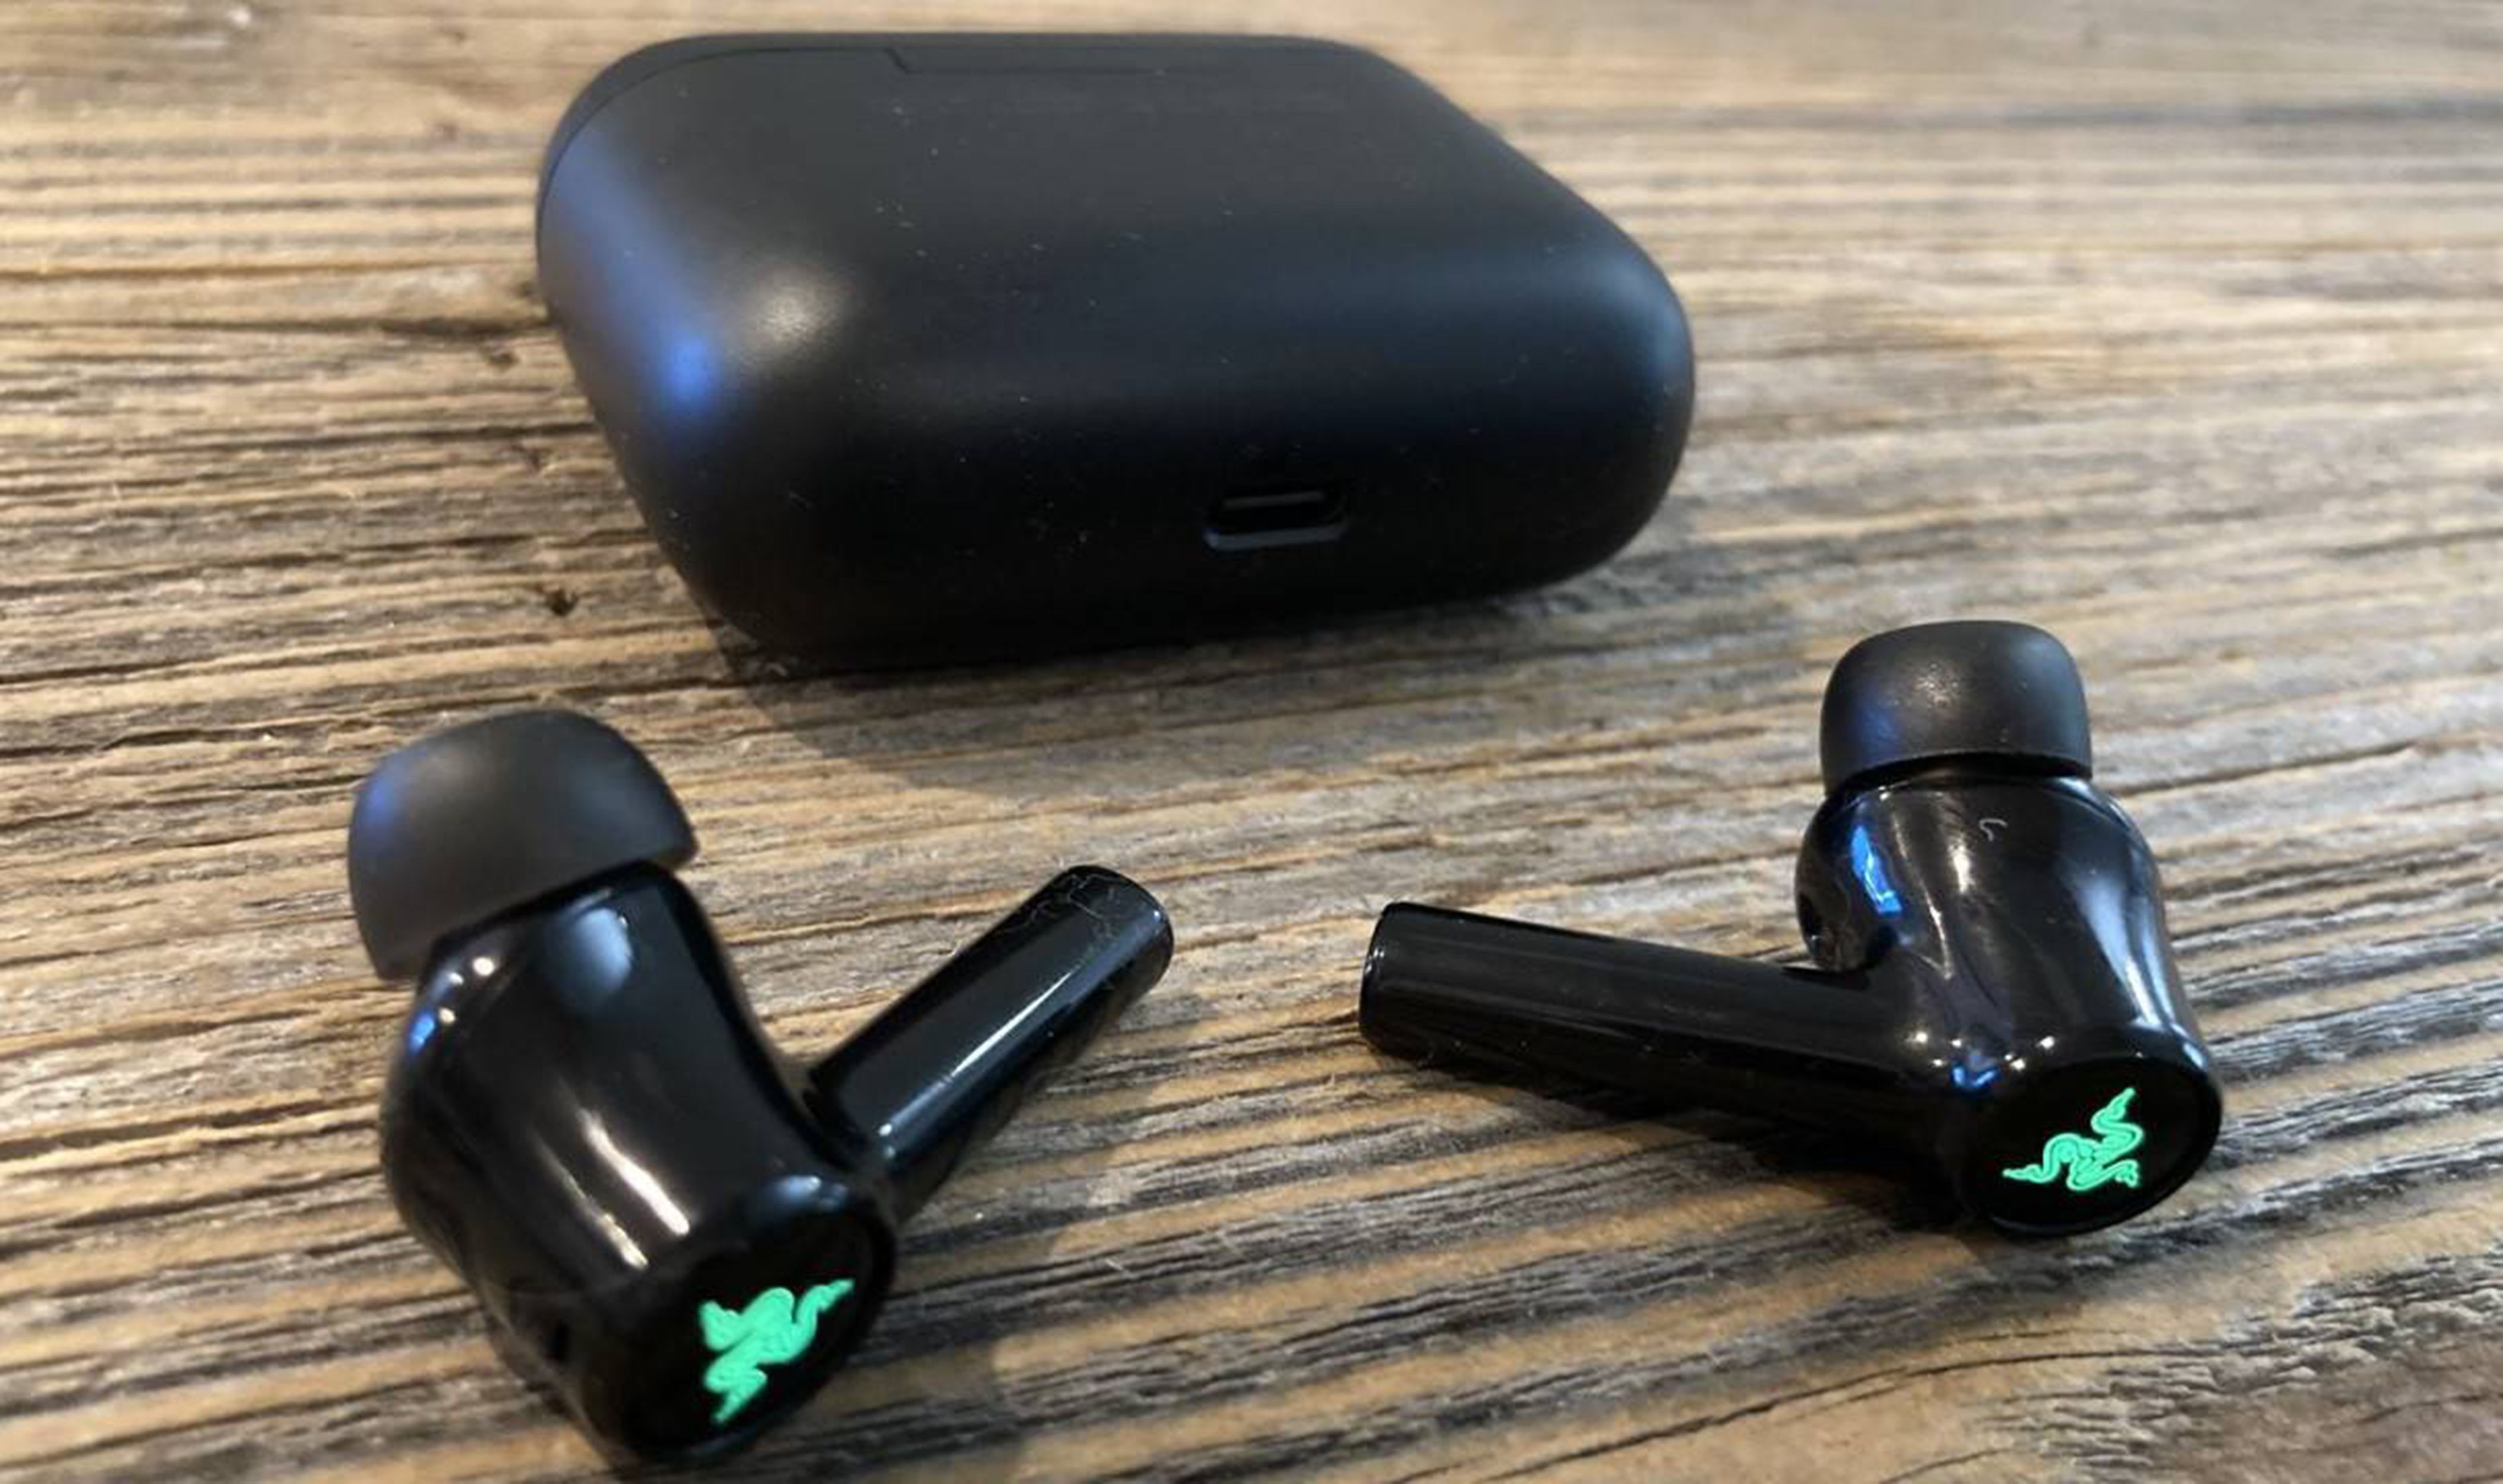 Razer Hammerhead True Wireless (2021) review: ANC with a colorful